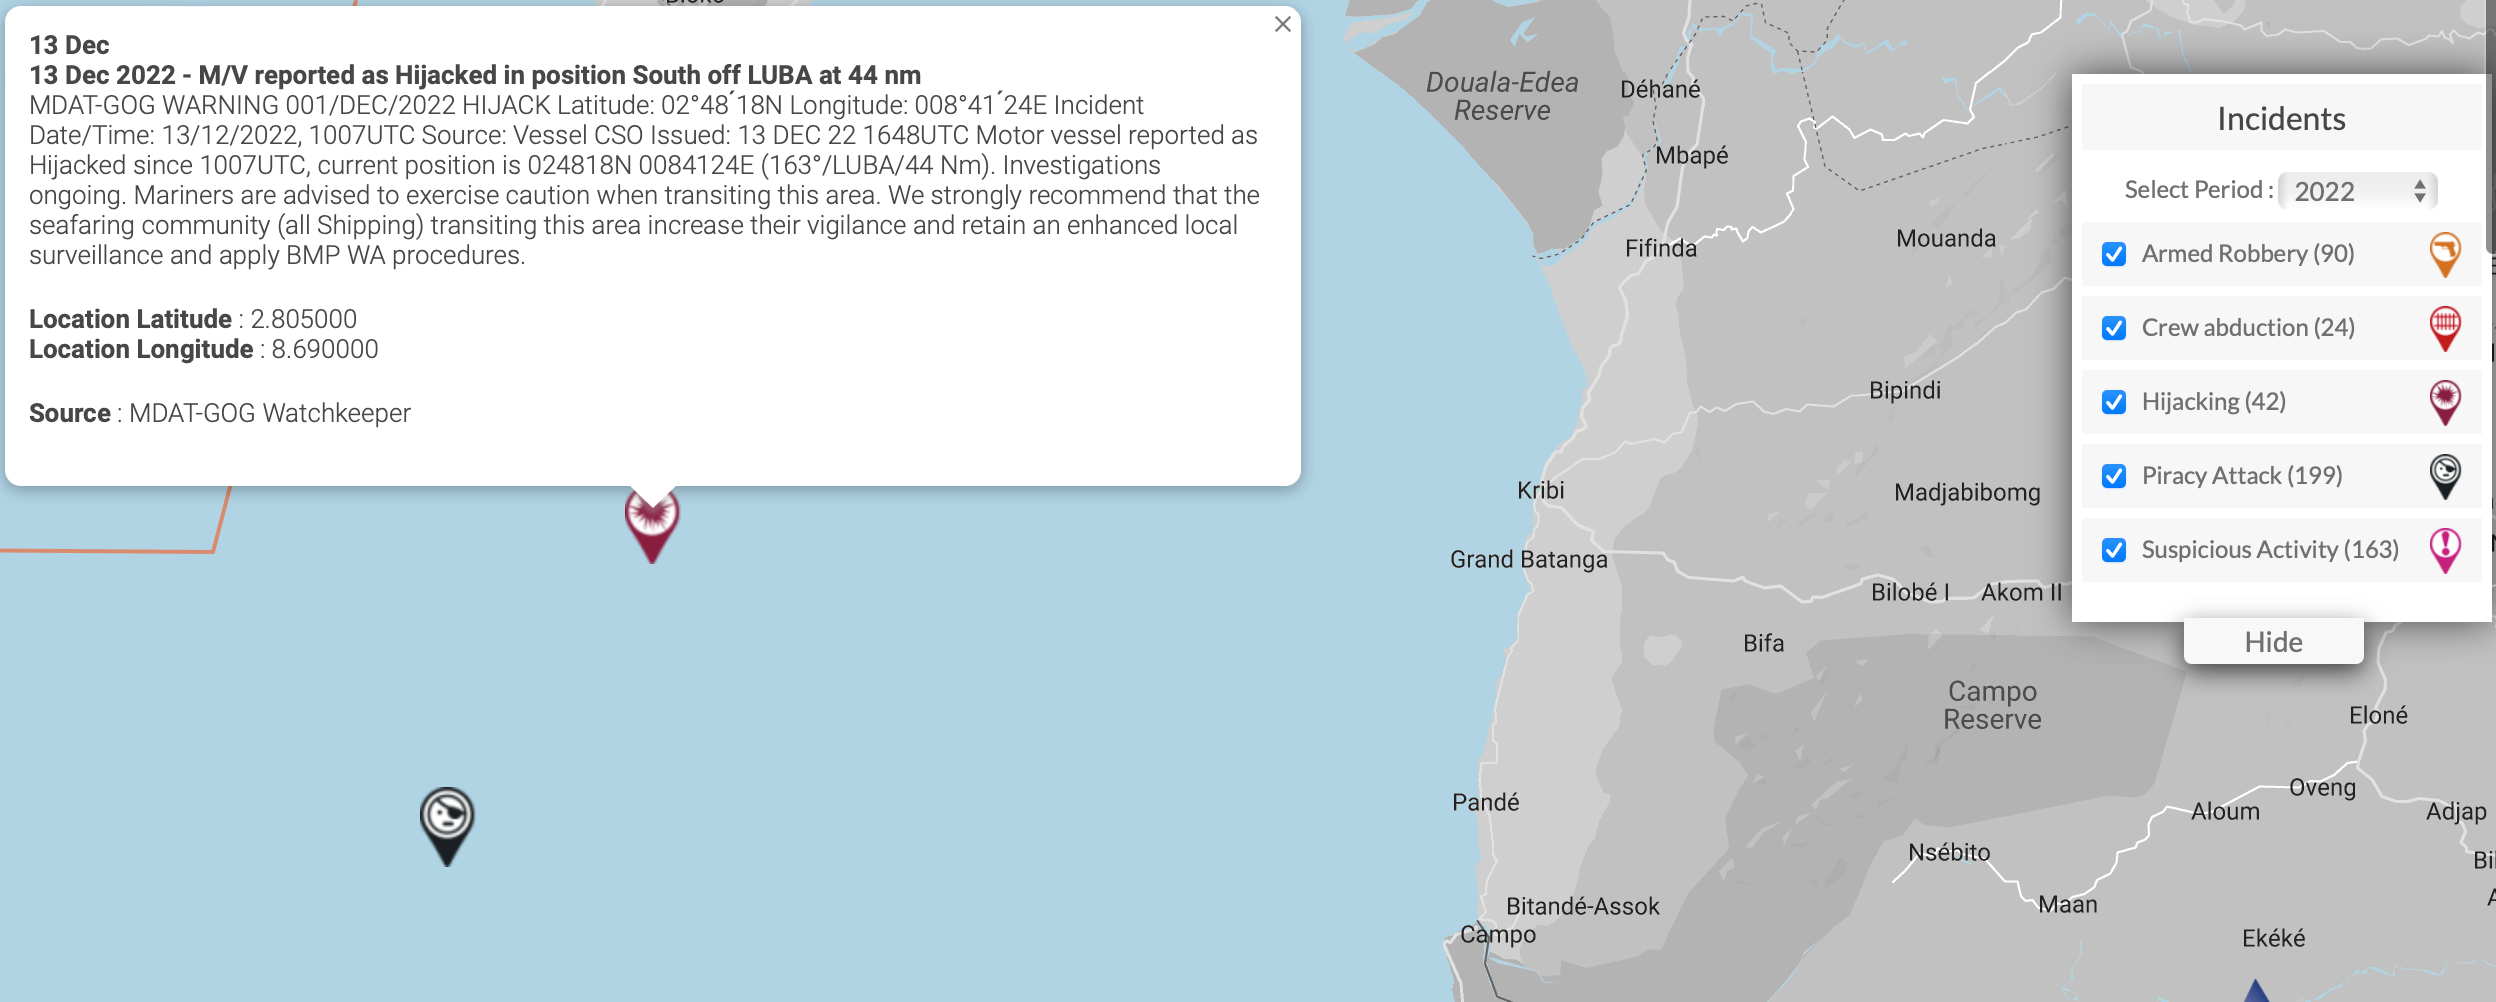 You are currently viewing 13 Dec 2022 – M/V reported as Hijacked in position South off LUBA at 44 nm